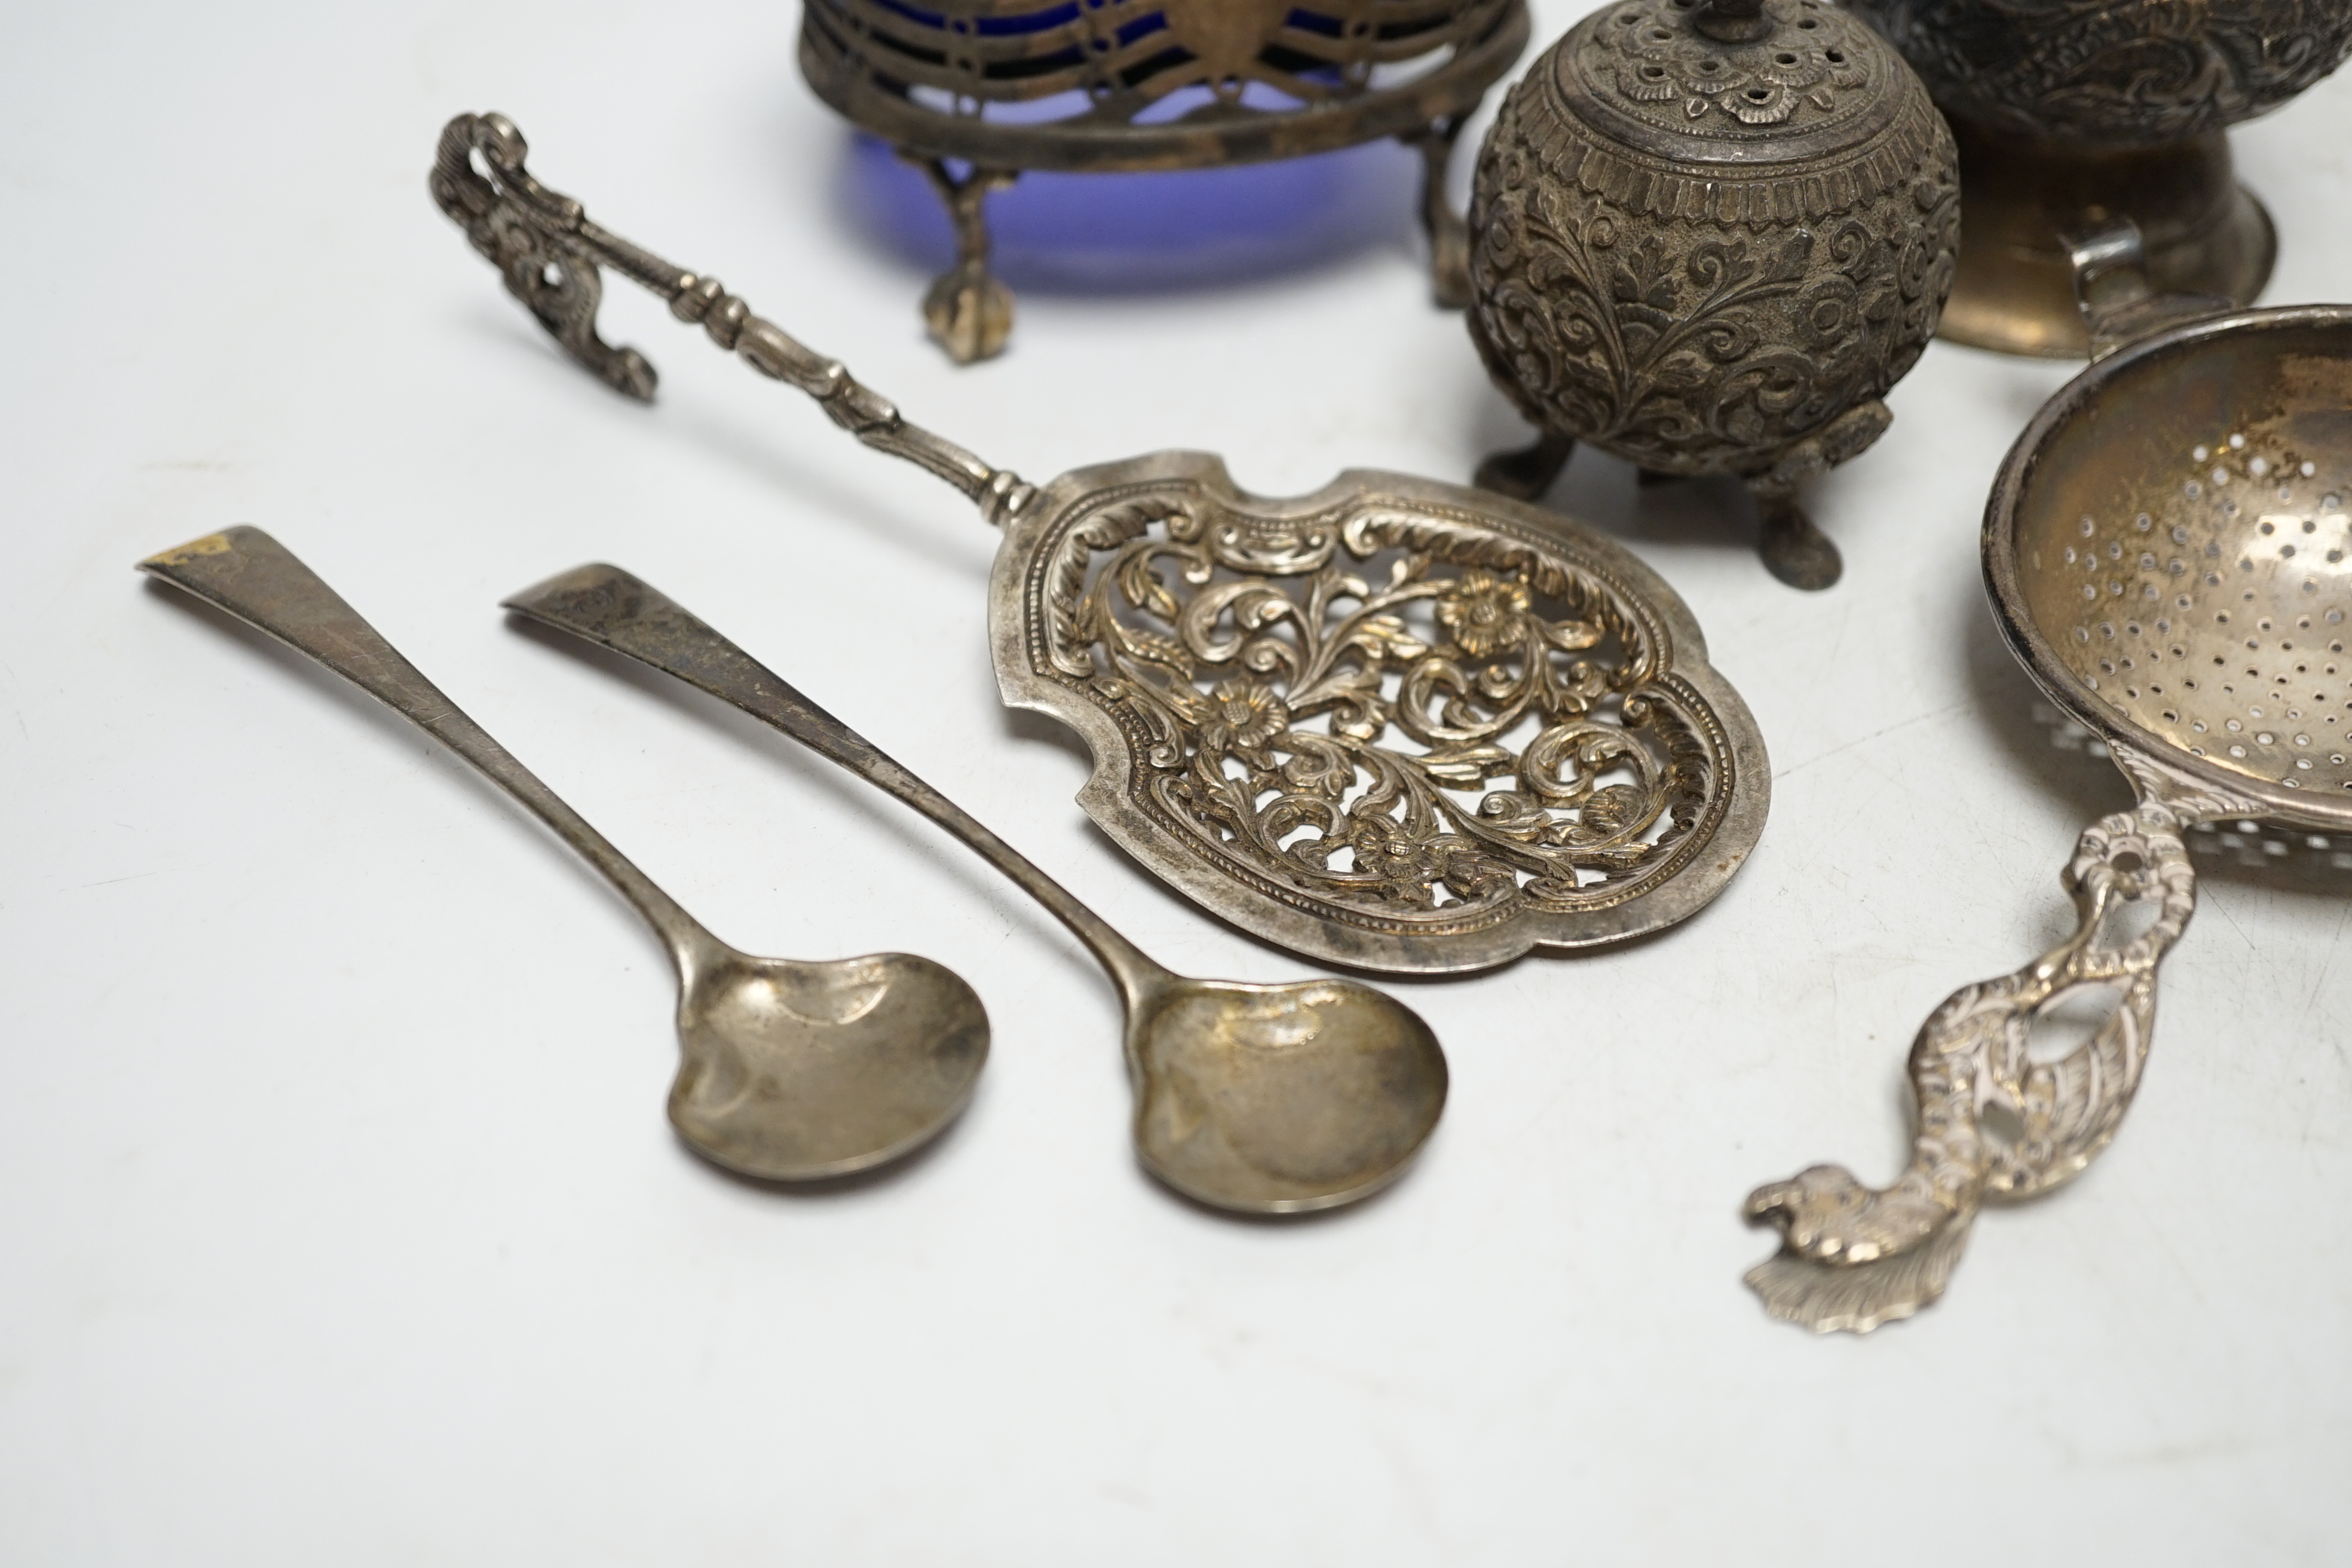 A group of small silver and white metal items including a George III oval salt, two Georgian condiment spoons, Indian condiment, etc. Condition- Fair.